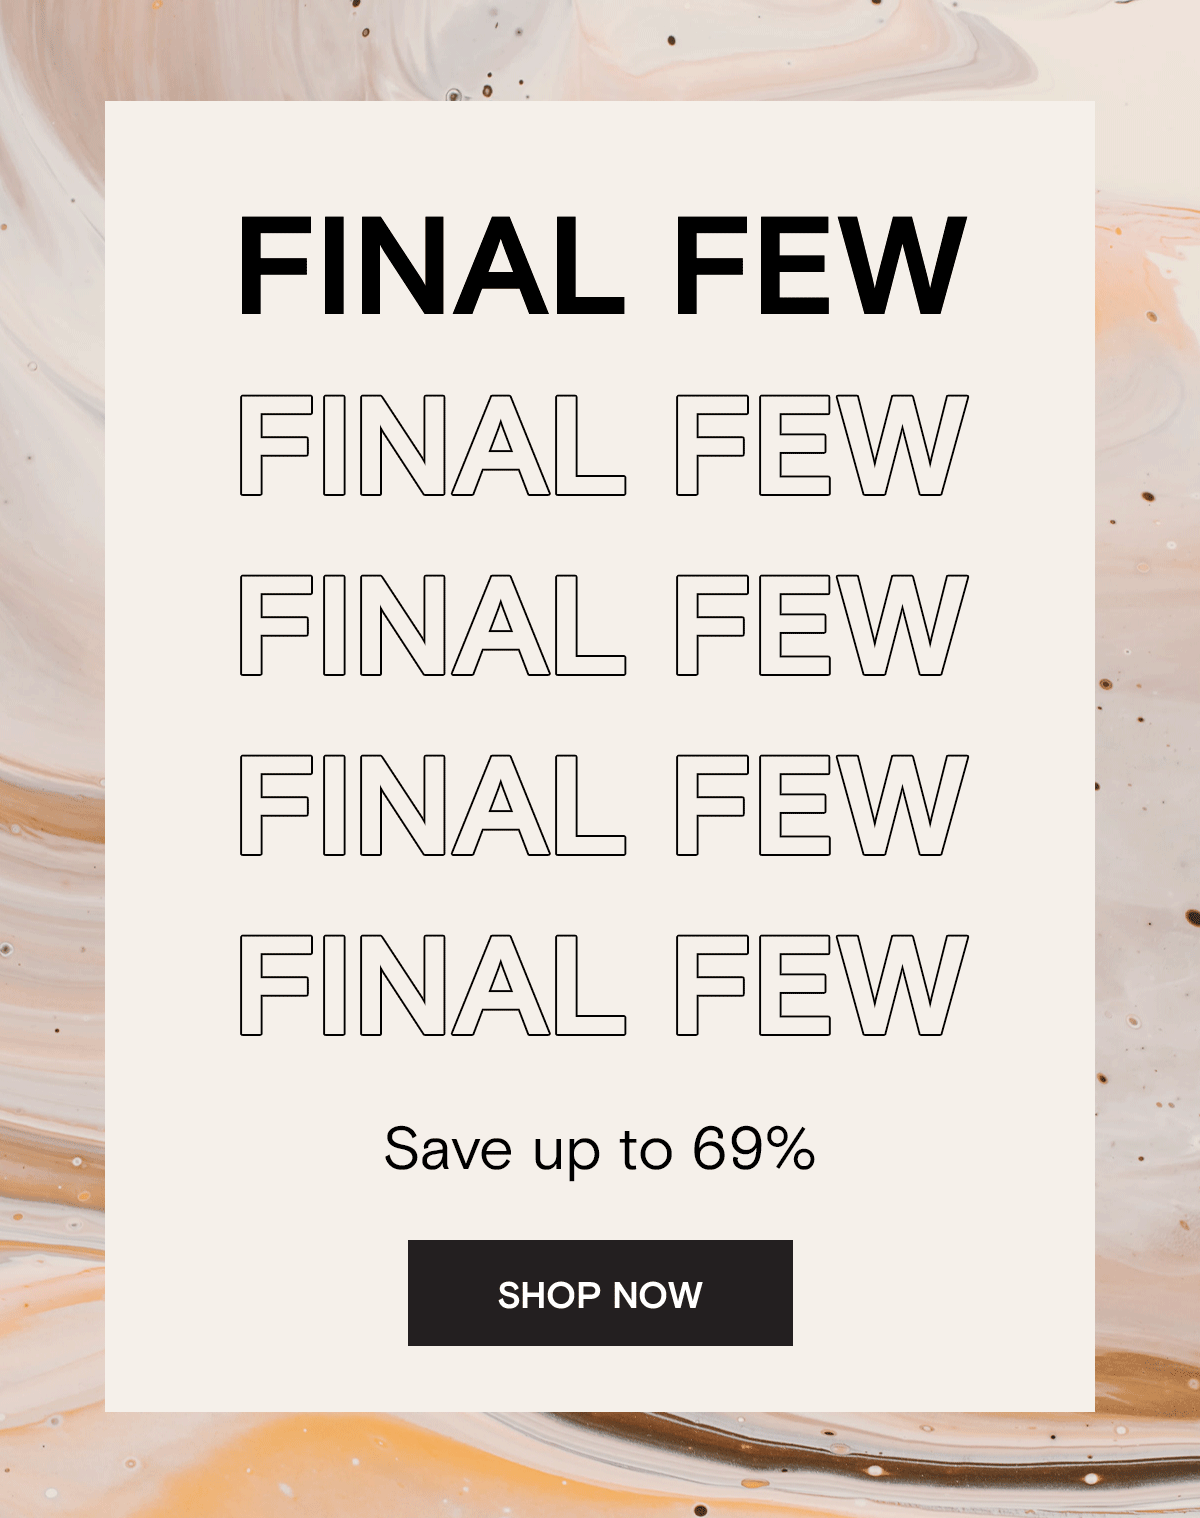 Save up to 69% on these final few